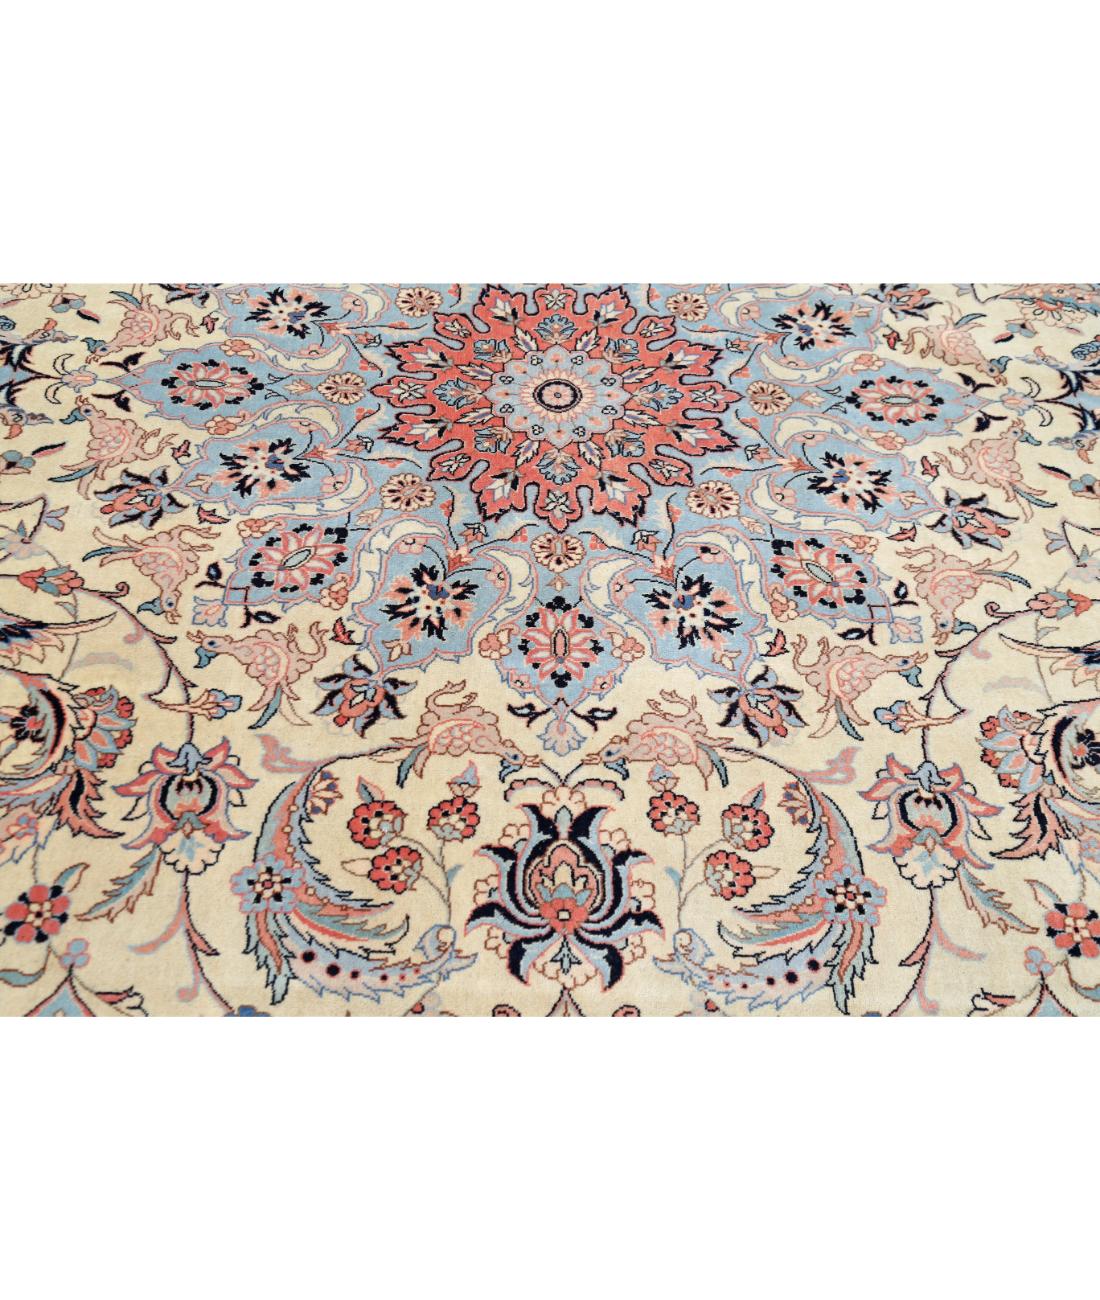 Heritage 11' 11" X 14' 10" Hand-Knotted Wool Rug 11' 11" X 14' 10" (363 X 452) / Ivory / Blue